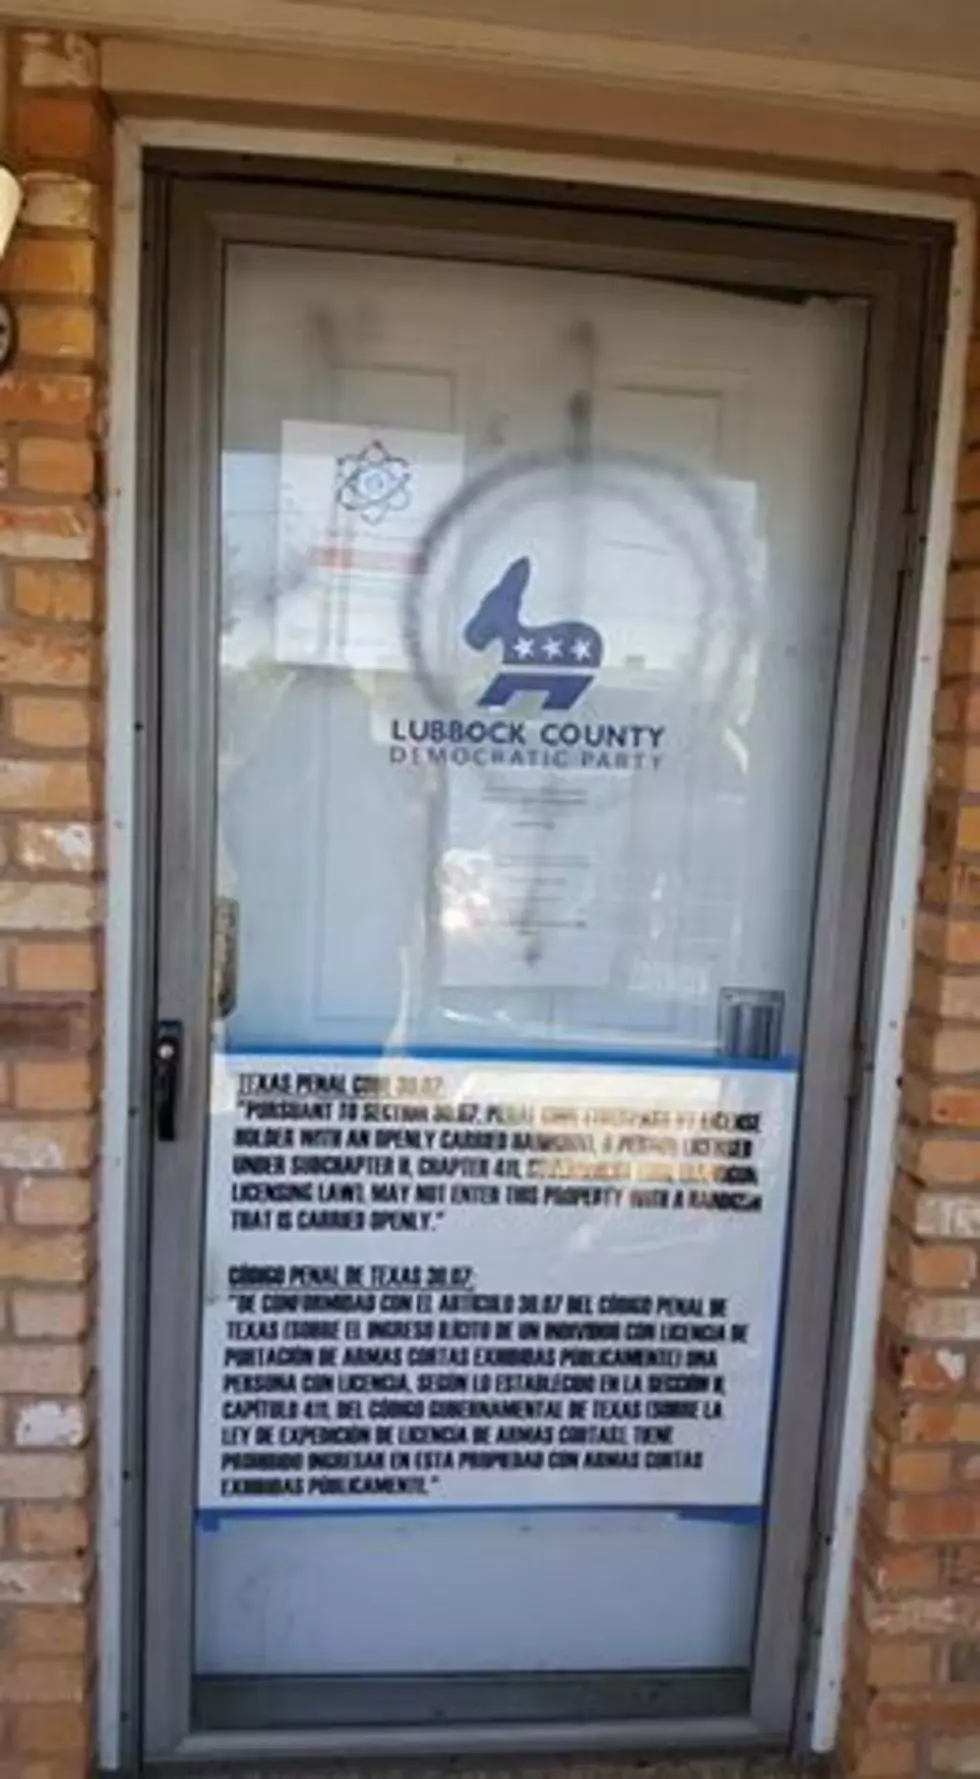 White Supremacist Graffiti Found Painted On Lubbock Democratic Party Headquarters